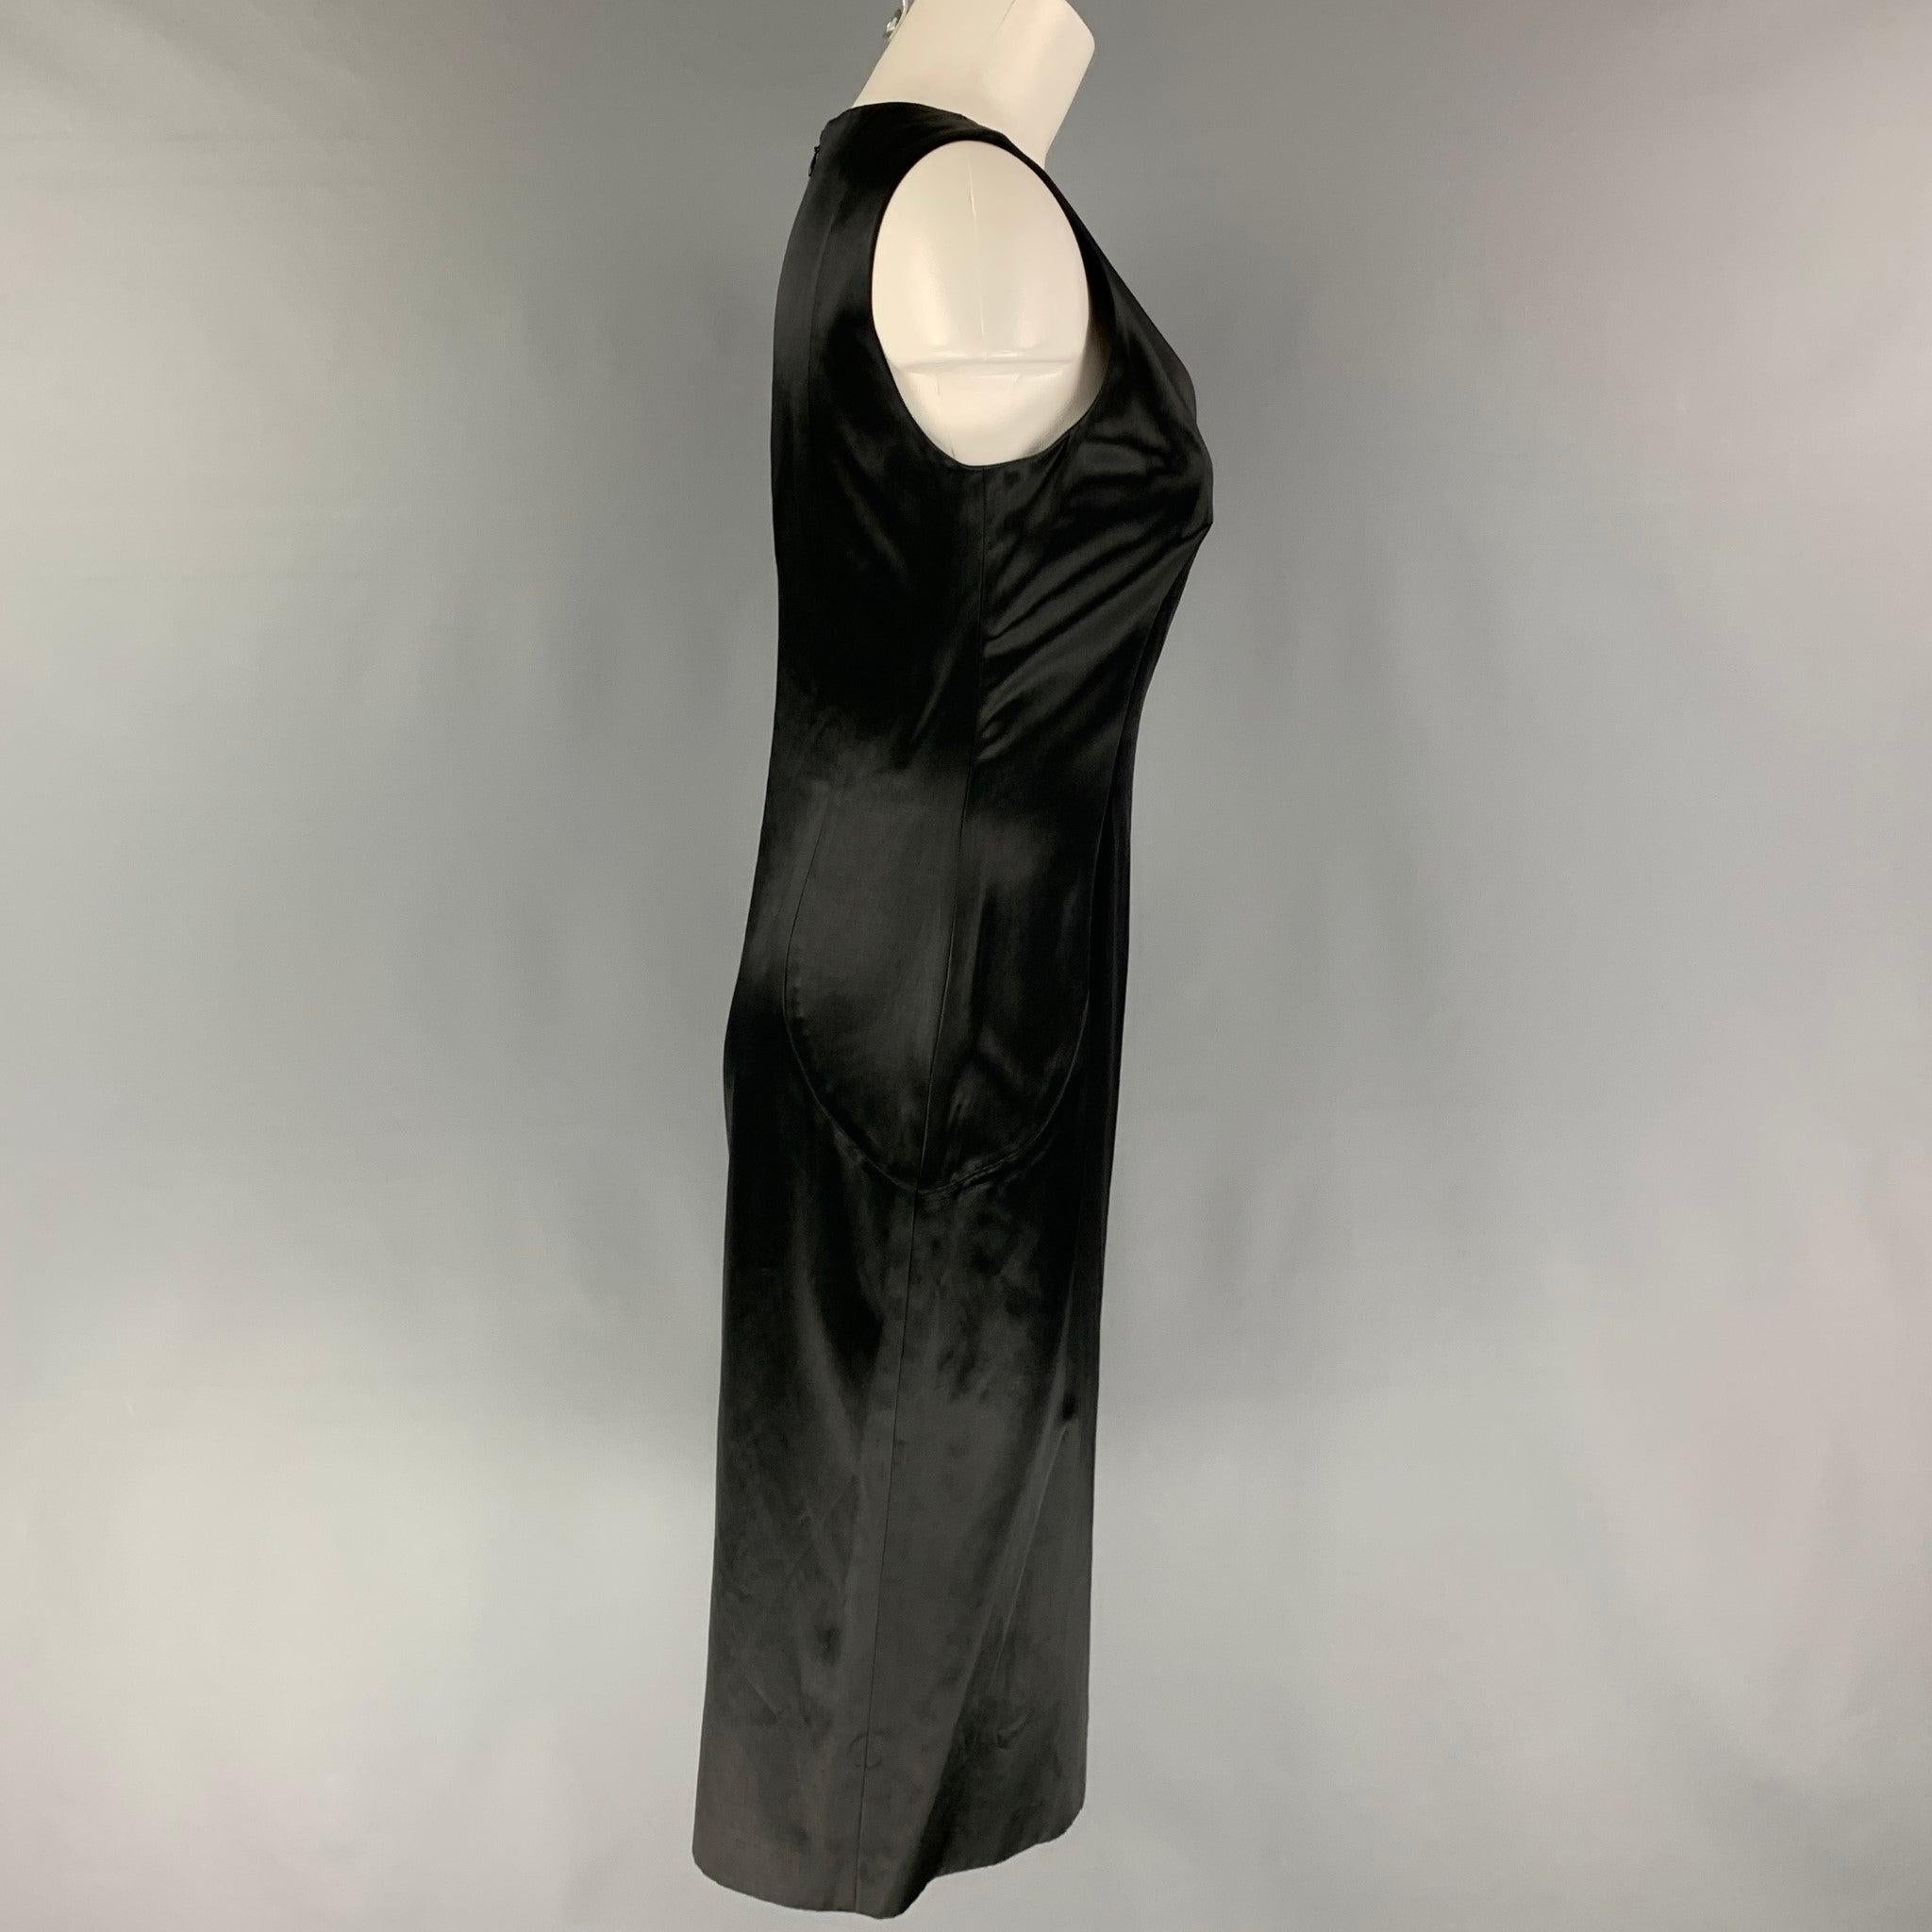 ETRO cocktail dress comes in a black satin cotton blend featuring a v-neck, sleeveless, a-line, back slit, and a back zip up closure. Made in Italy.
Very Good
Pre-Owned Condition. 

Marked:   42 

Measurements: 
 
Shoulder: 14.5 inches  Bust: 32